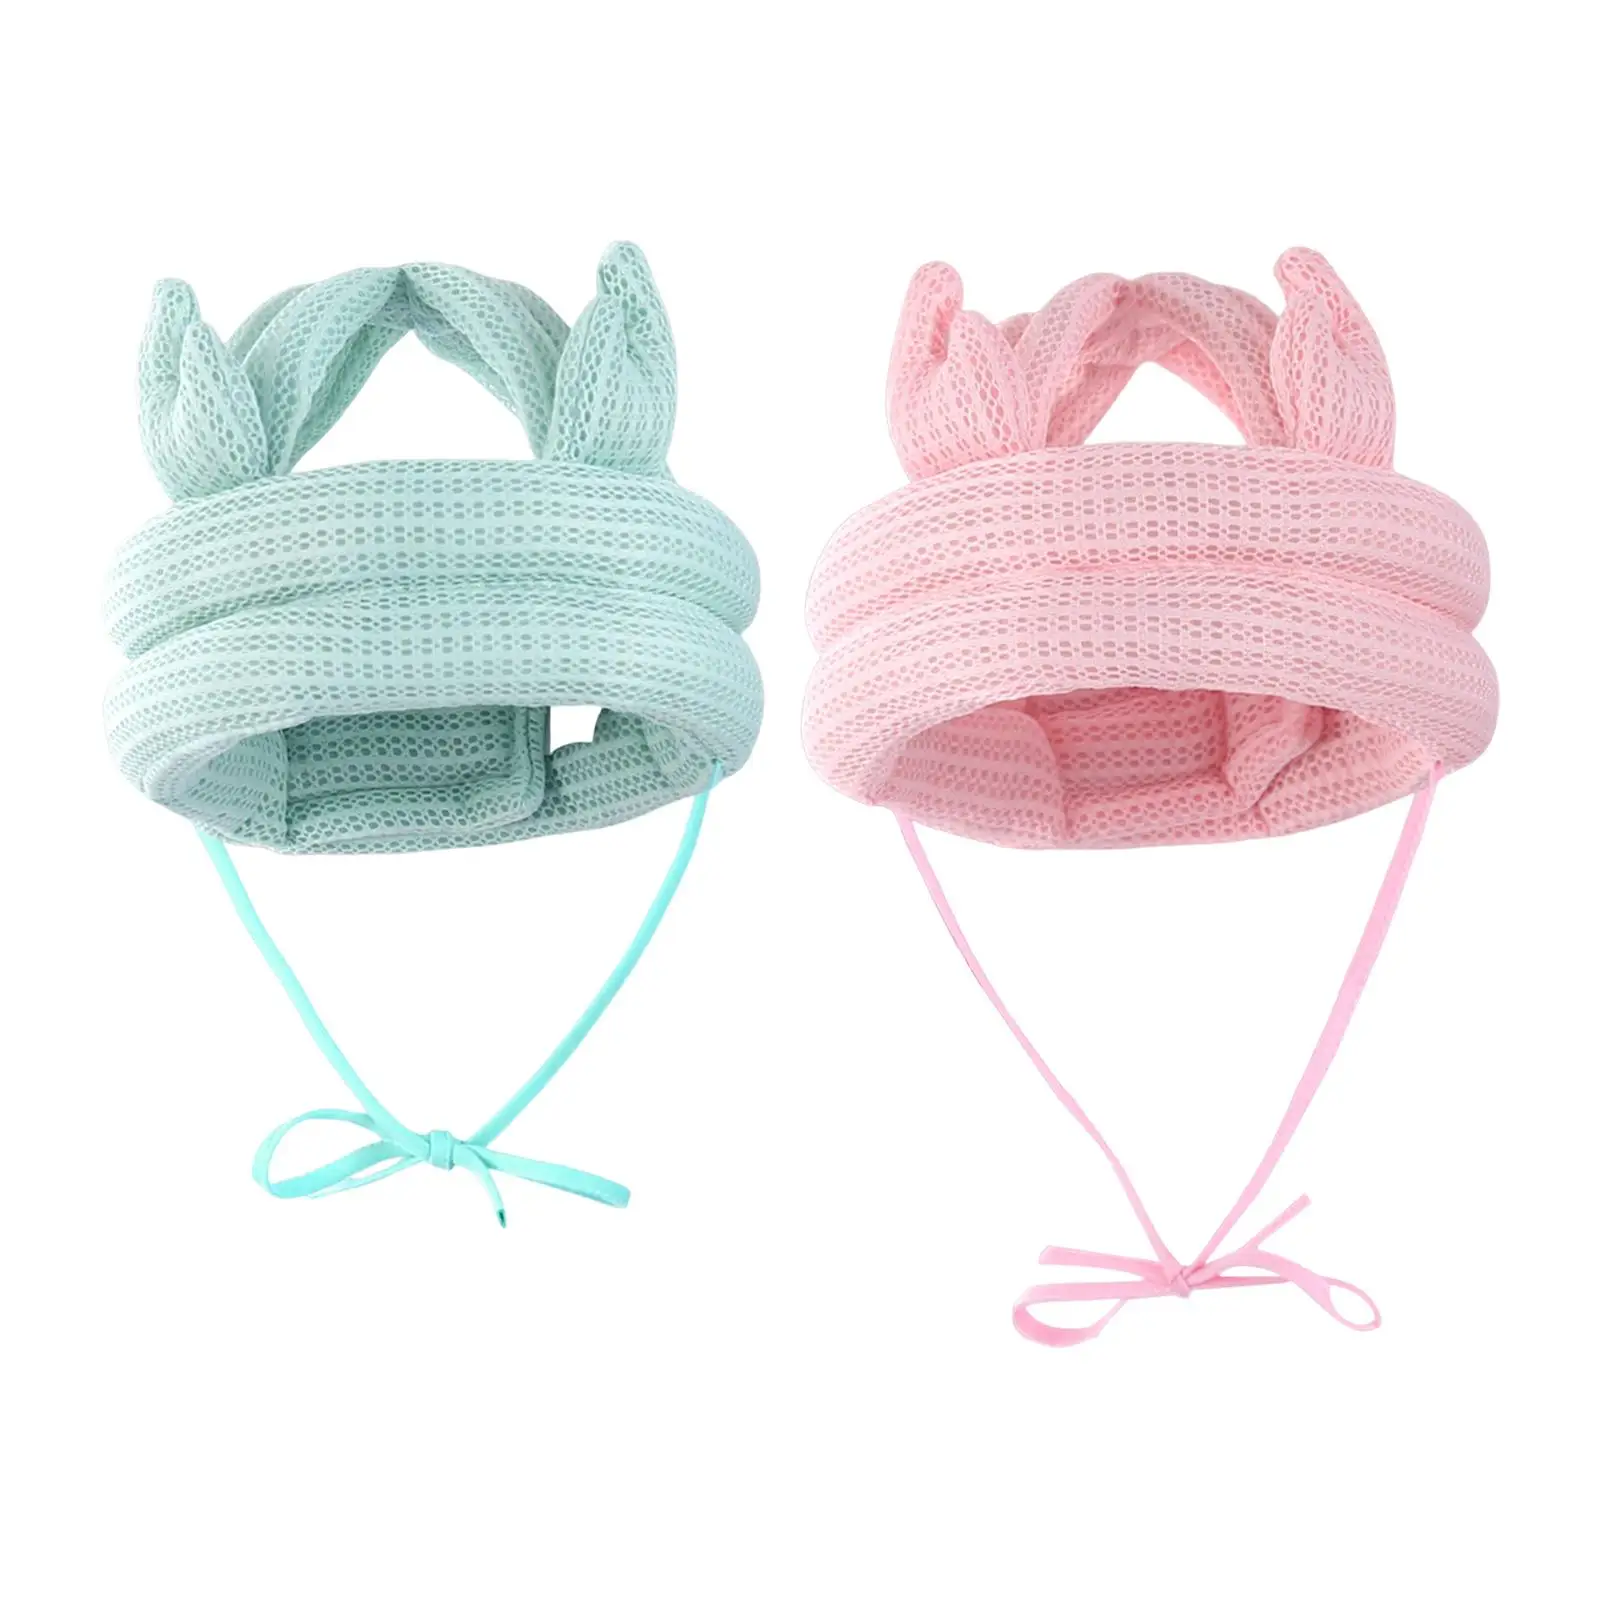 Infant Head Protective Hat Baby Protective Cap for Kids Infant Walking